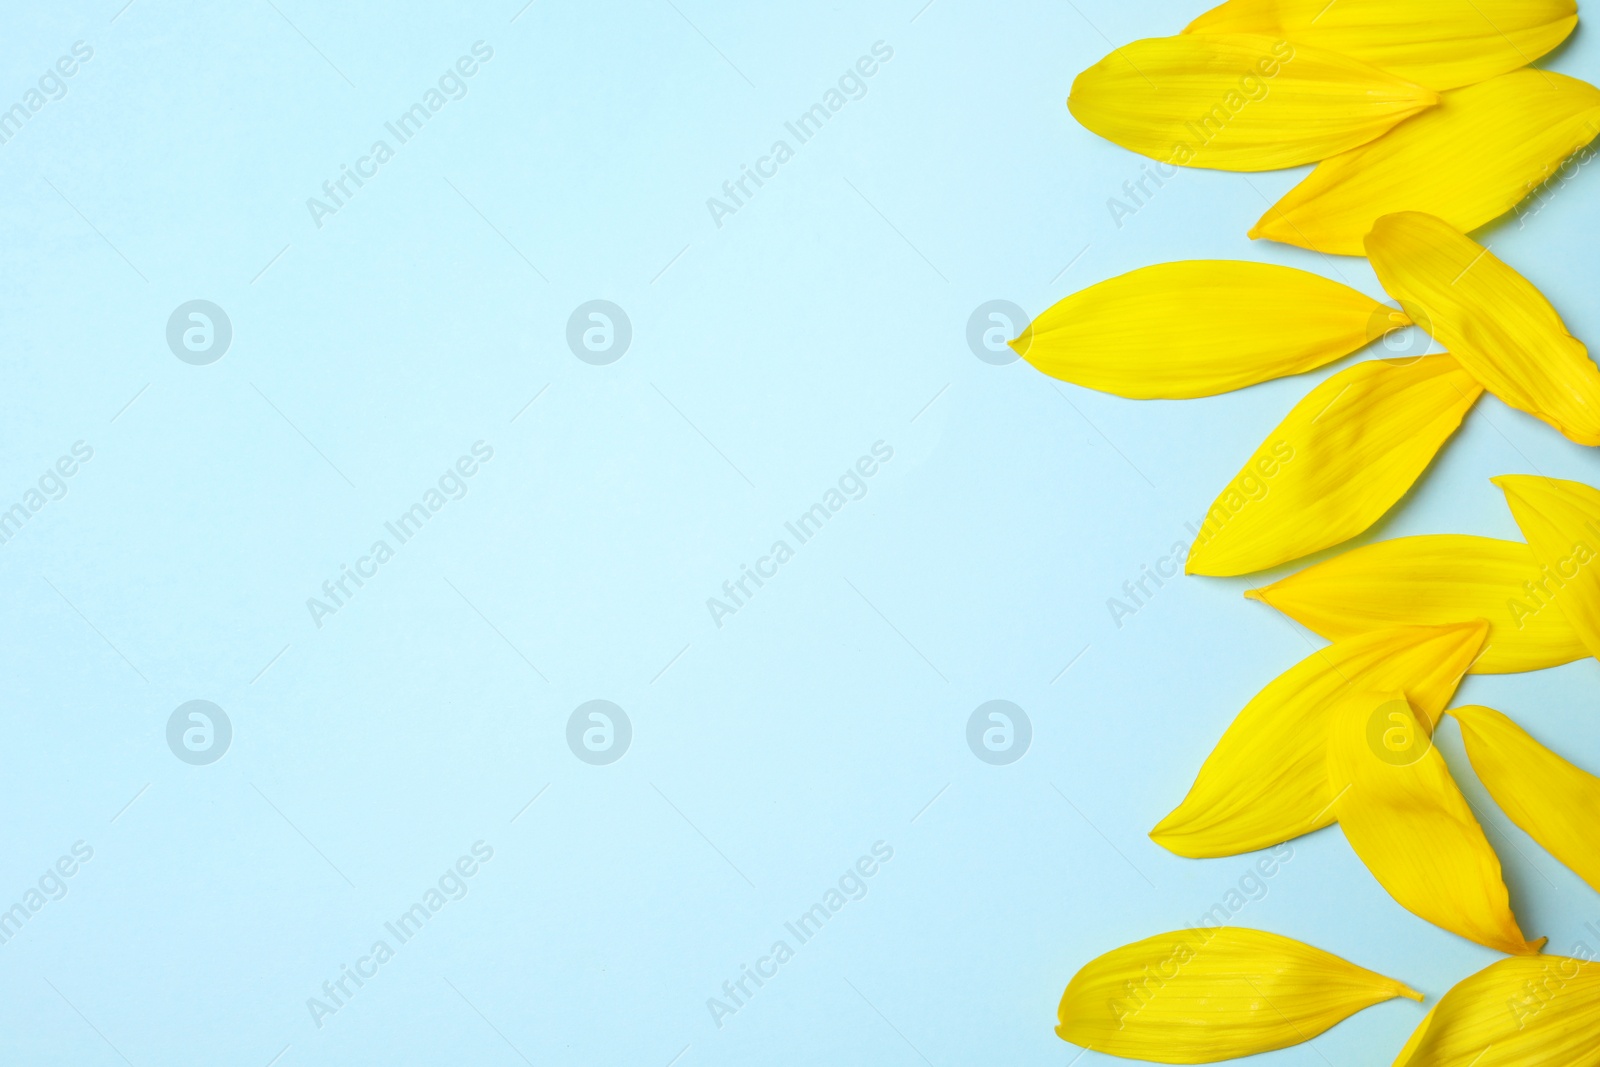 Photo of Fresh yellow sunflower petals on light blue background, flat lay. Space for text